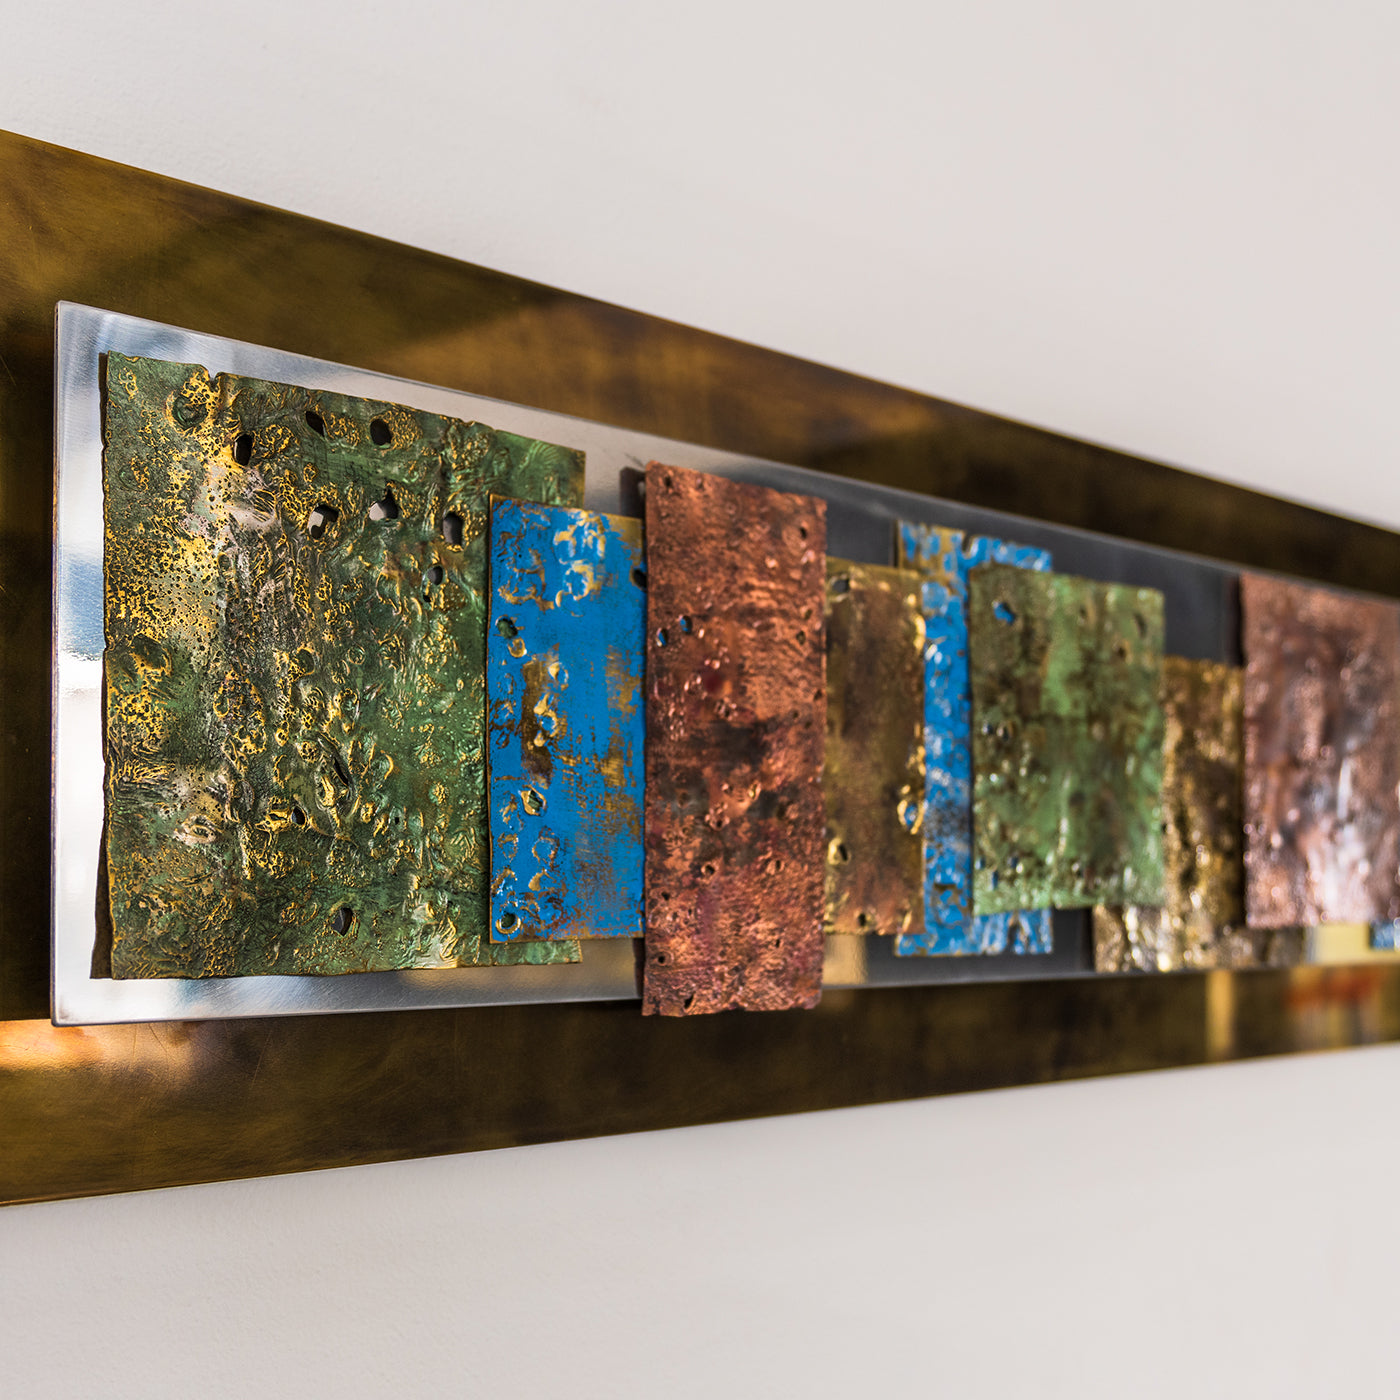 Autunno Metal Wall Sculpture by Davide Foletti - Alternative view 4